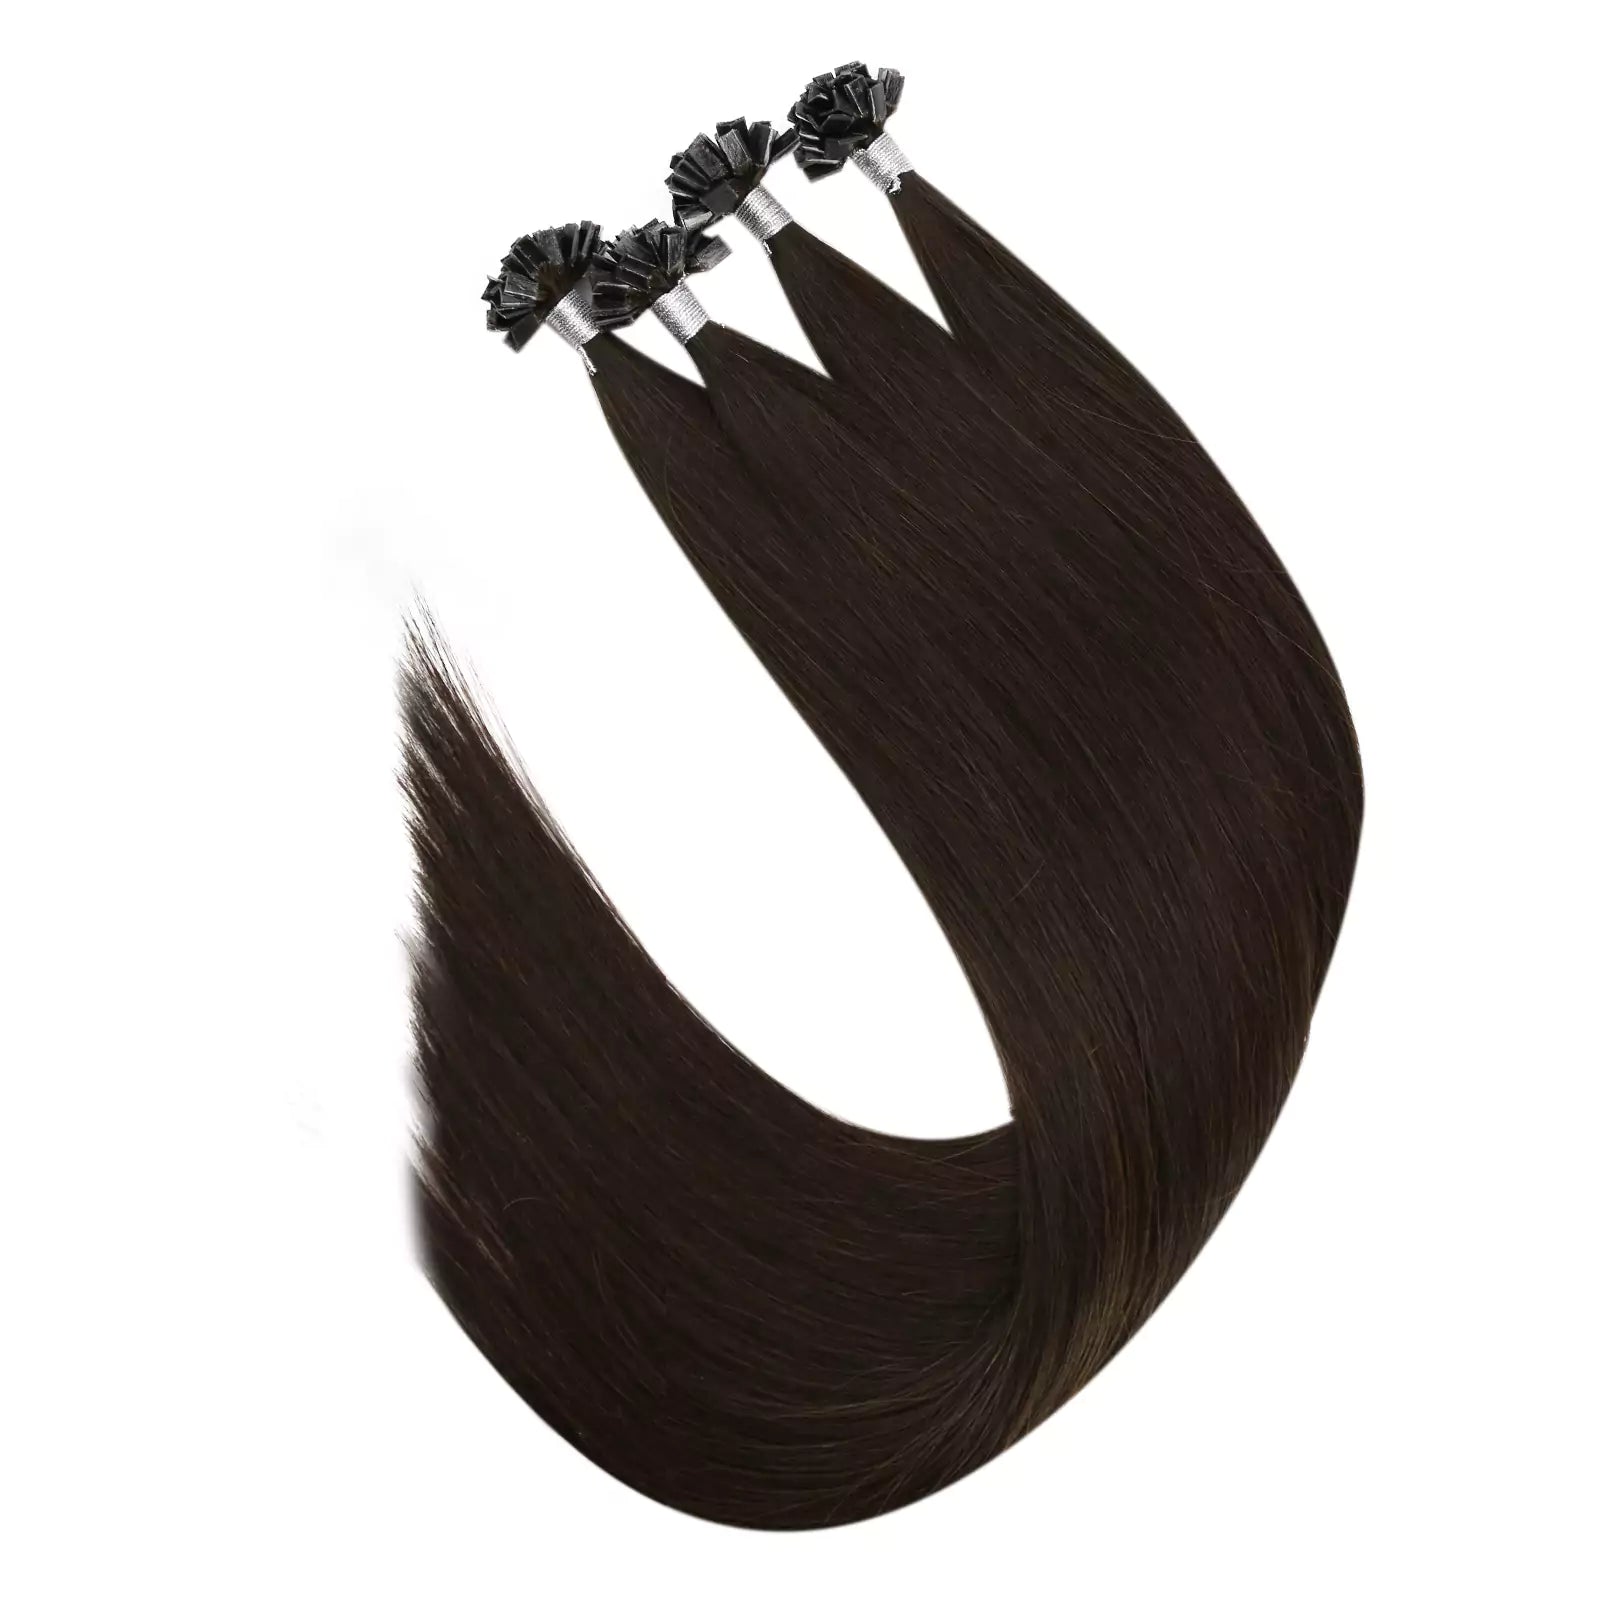 Ktip hair extensions combine the advantages of Utip extensions and flat tip extensions.